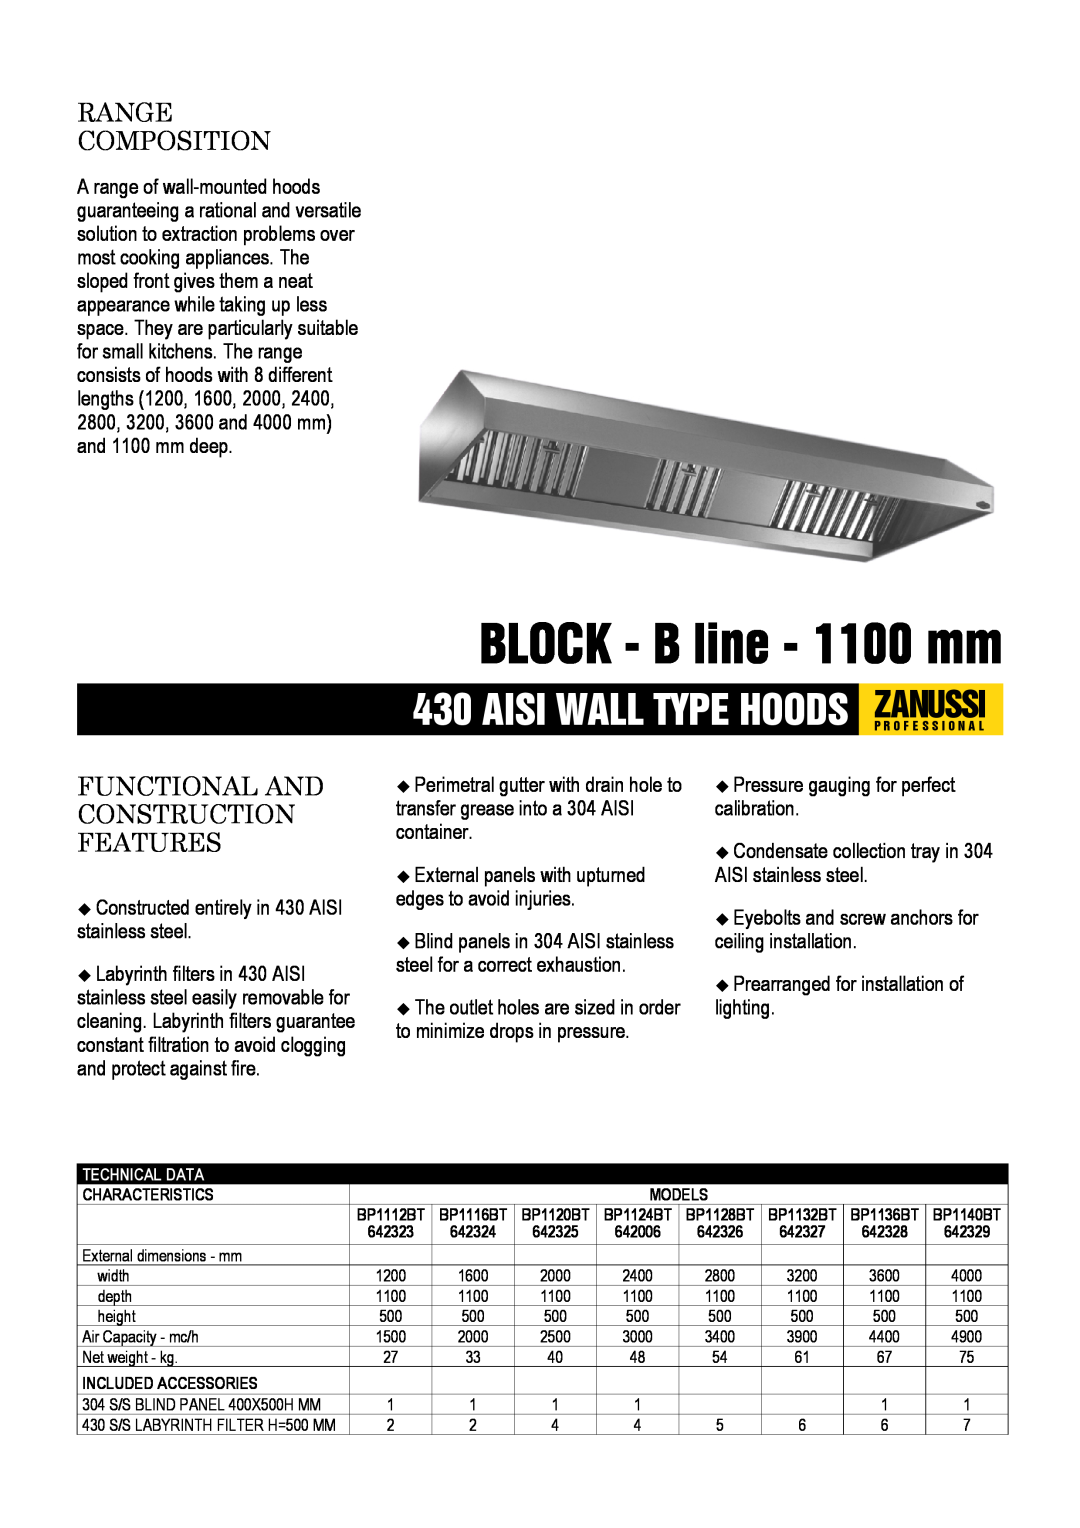 Zanussi 642324, BP1116BT dimensions BLOCK - B line - 1100 mm, Range Composition, Functional And Construction Features 